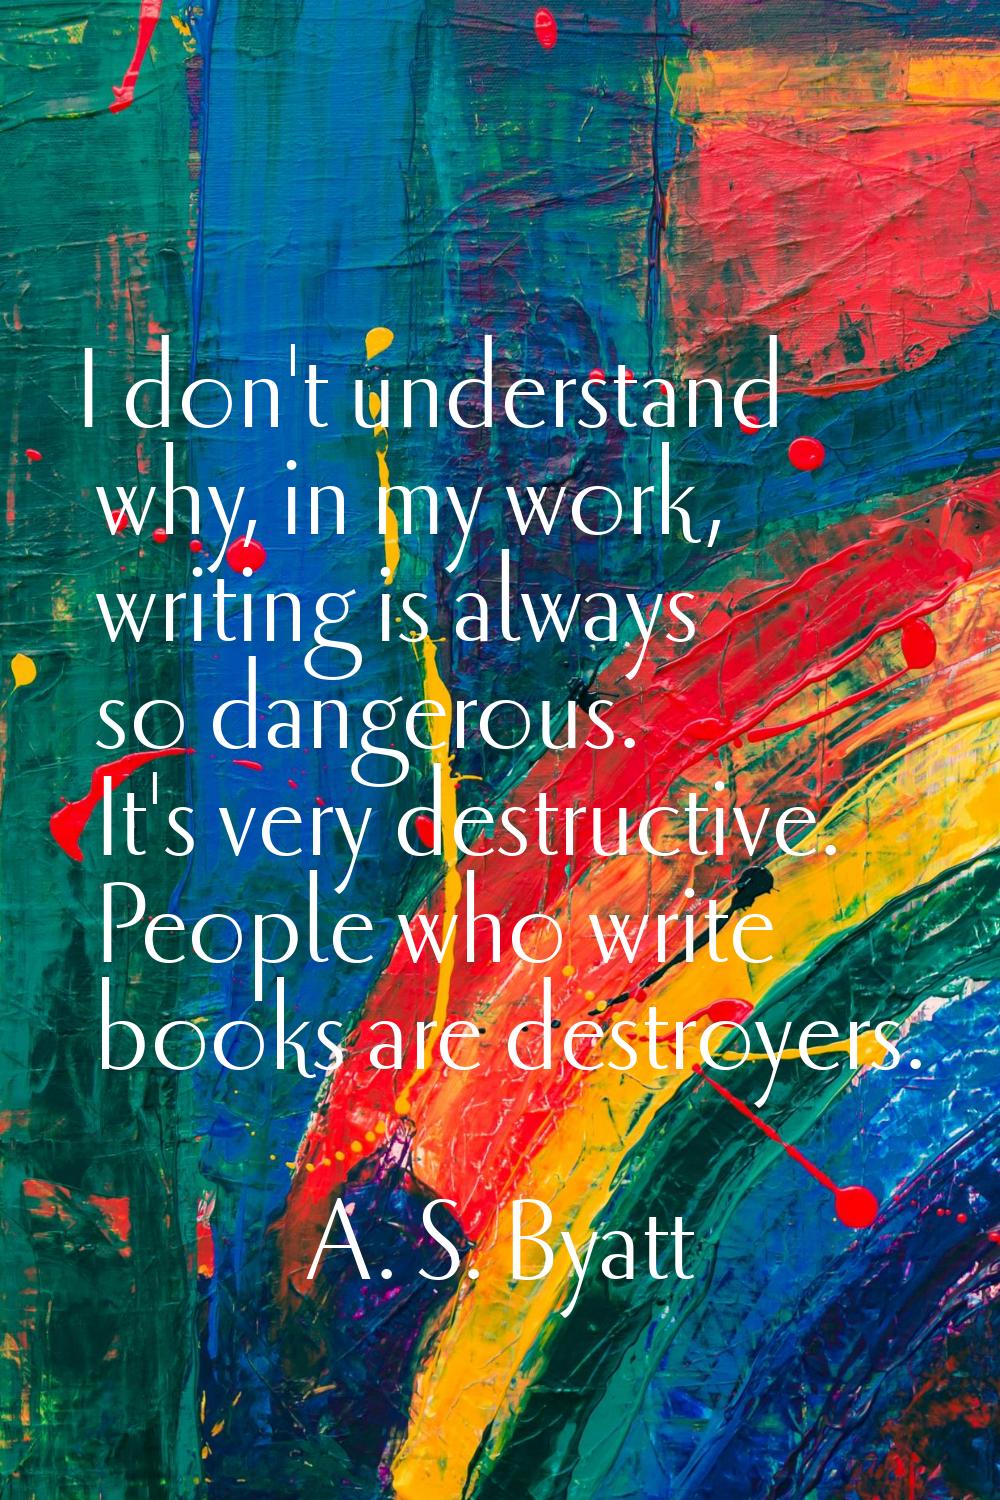 I don't understand why, in my work, writing is always so dangerous. It's very destructive. People w